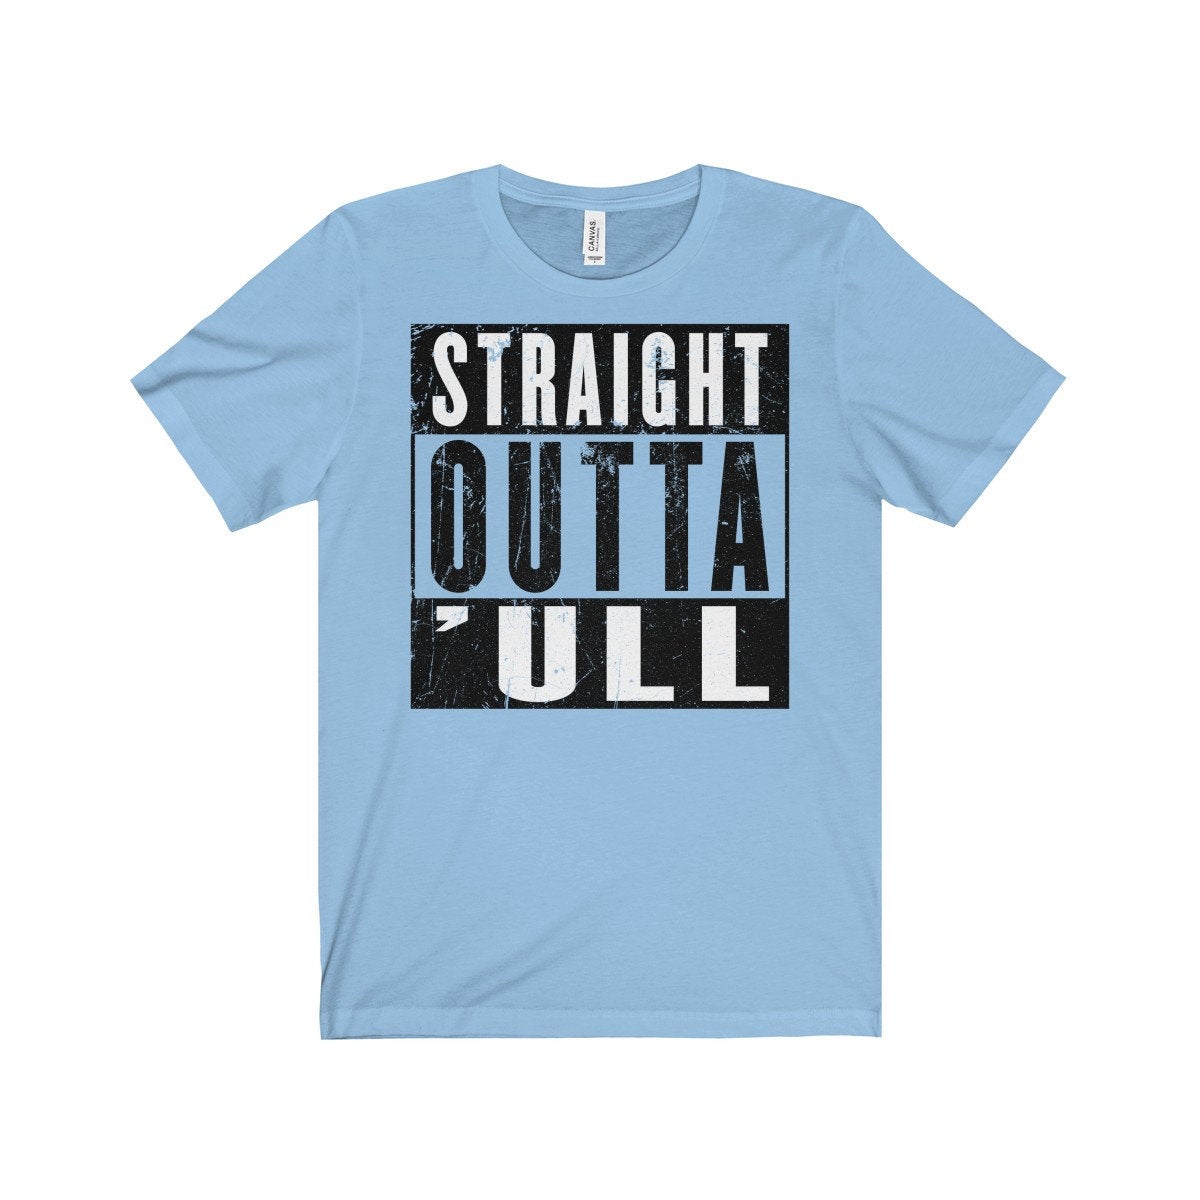 Straight Outta Hull (&#39;ull) Funny Compton NWA Style Unisex Jersey Short Sleeve Tee